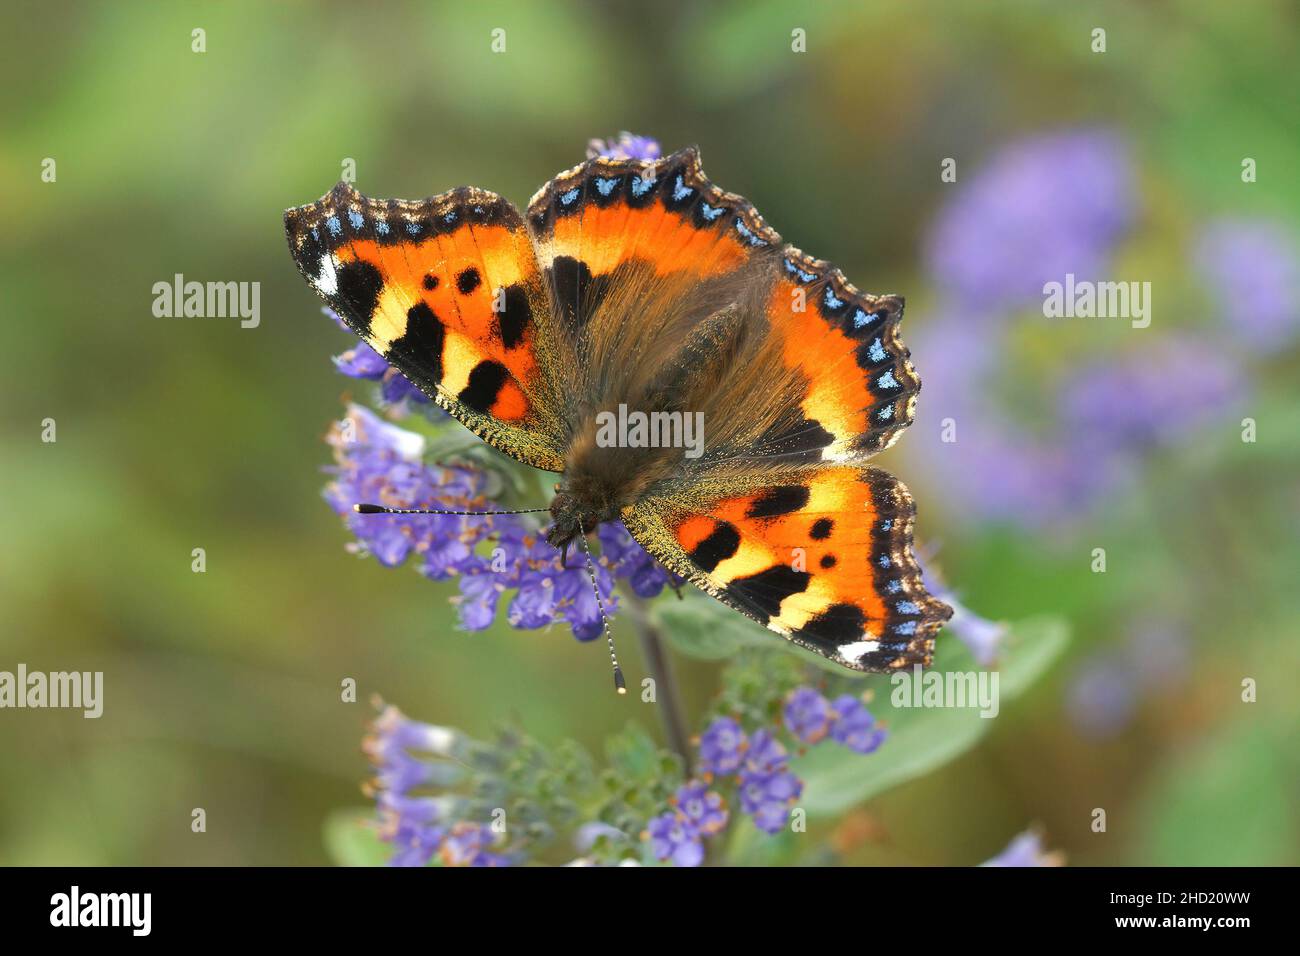 Closeup on a colorful fresh emerged small tortoiseshell butterfly, Aglais urticae, sipping nectar from the blue flower of Caryopteris incana in the ga Stock Photo